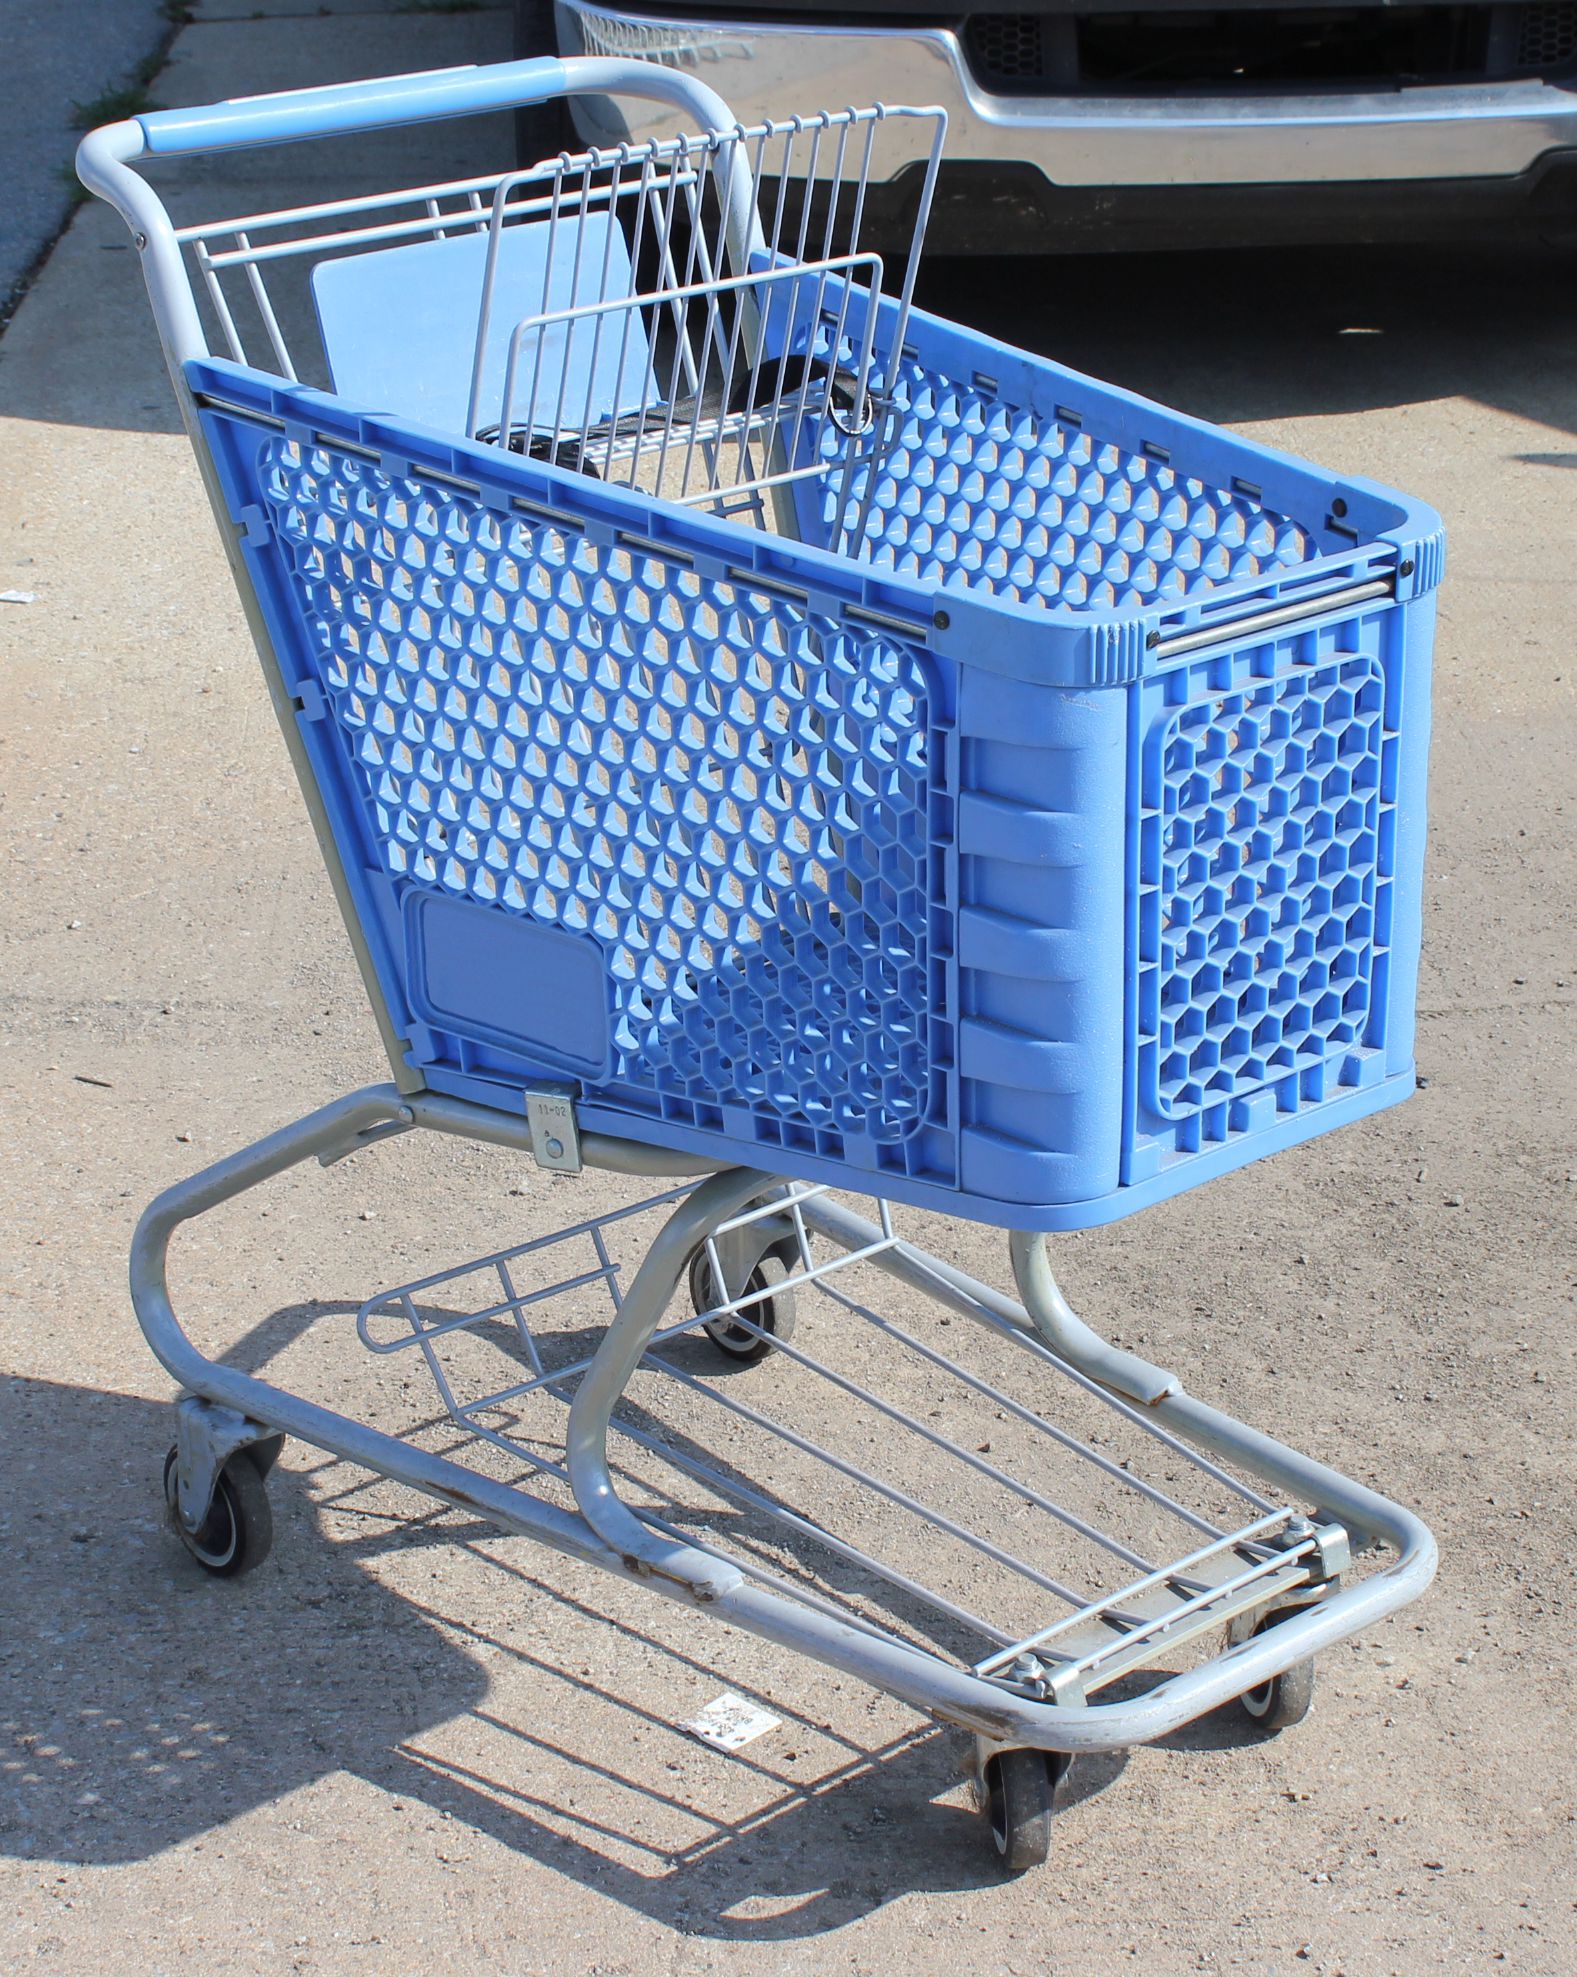 The Unarco PC10: The Classic Plastic Shopping Cart You Need